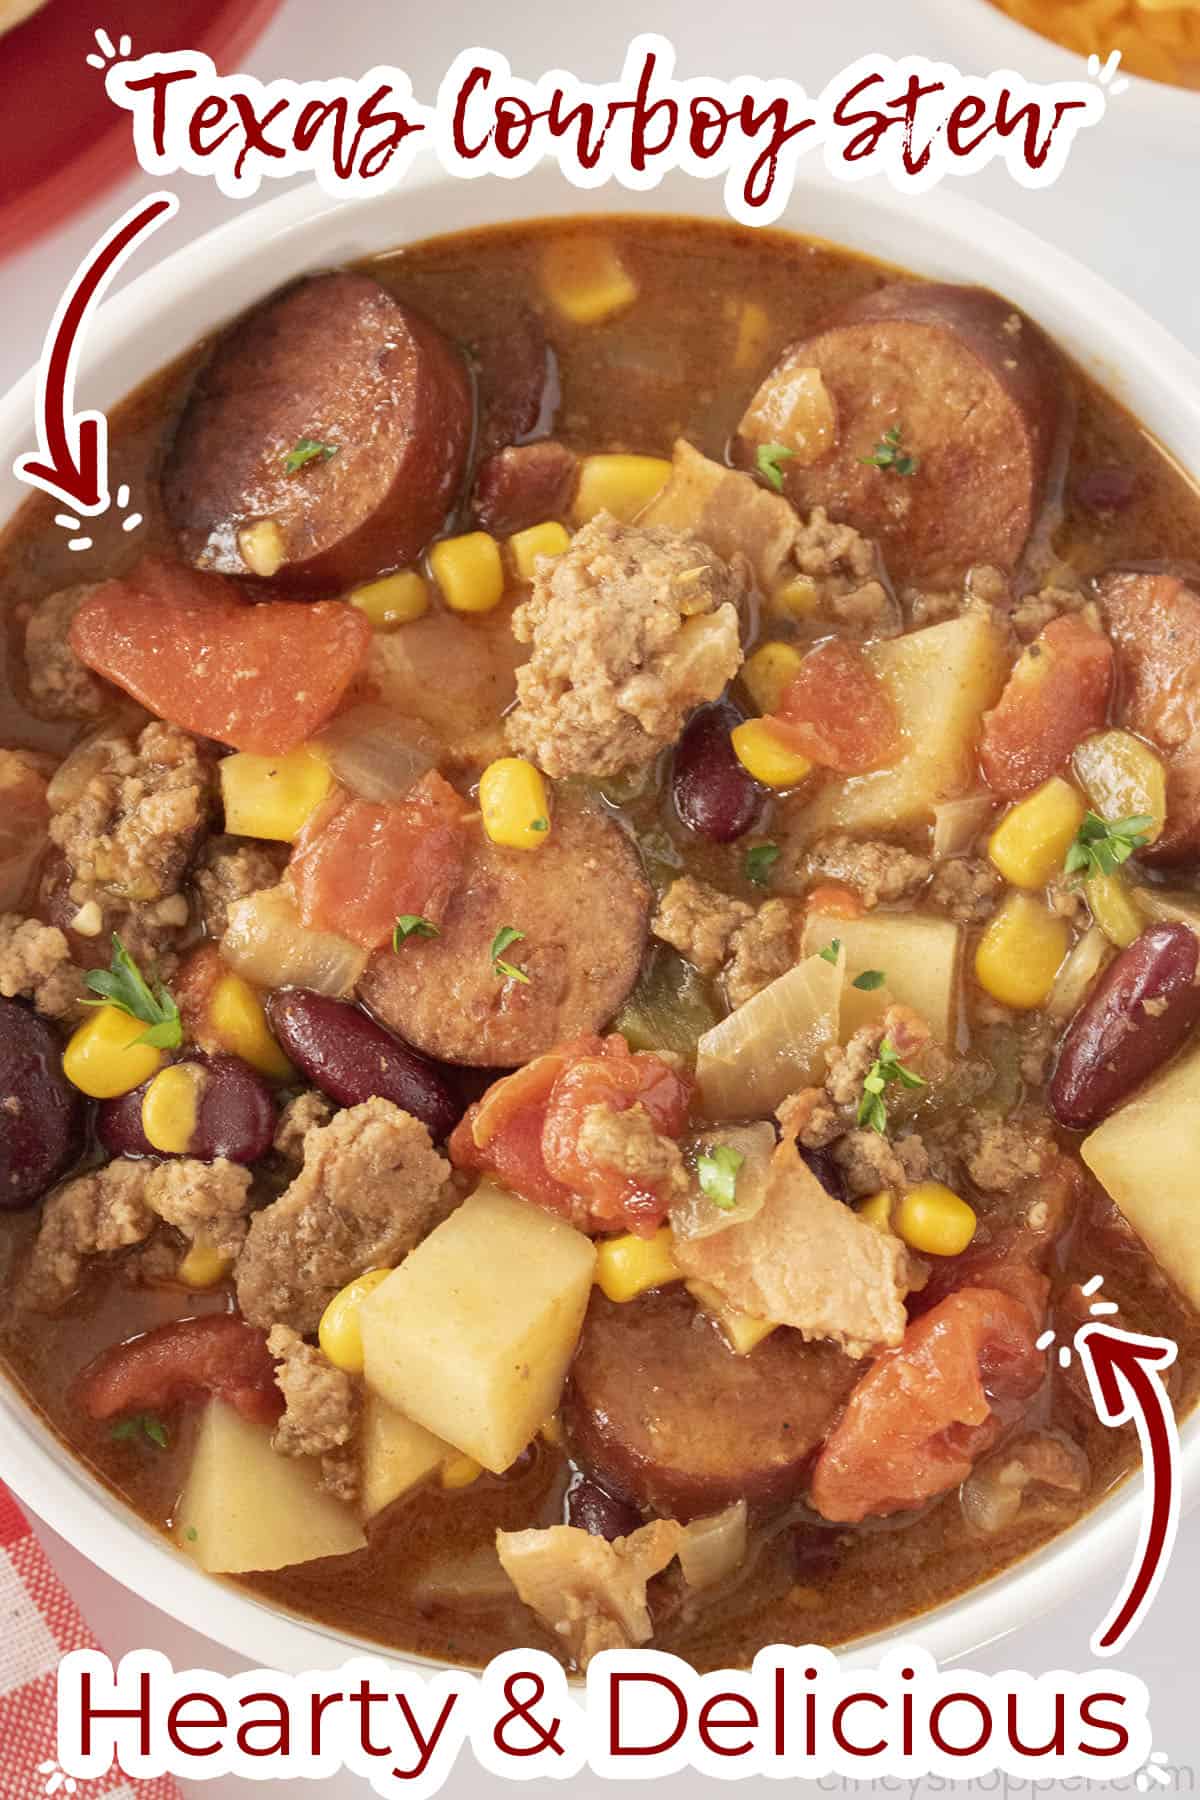 Text on image Texas Cowboy Stew Hearty & Delicious.